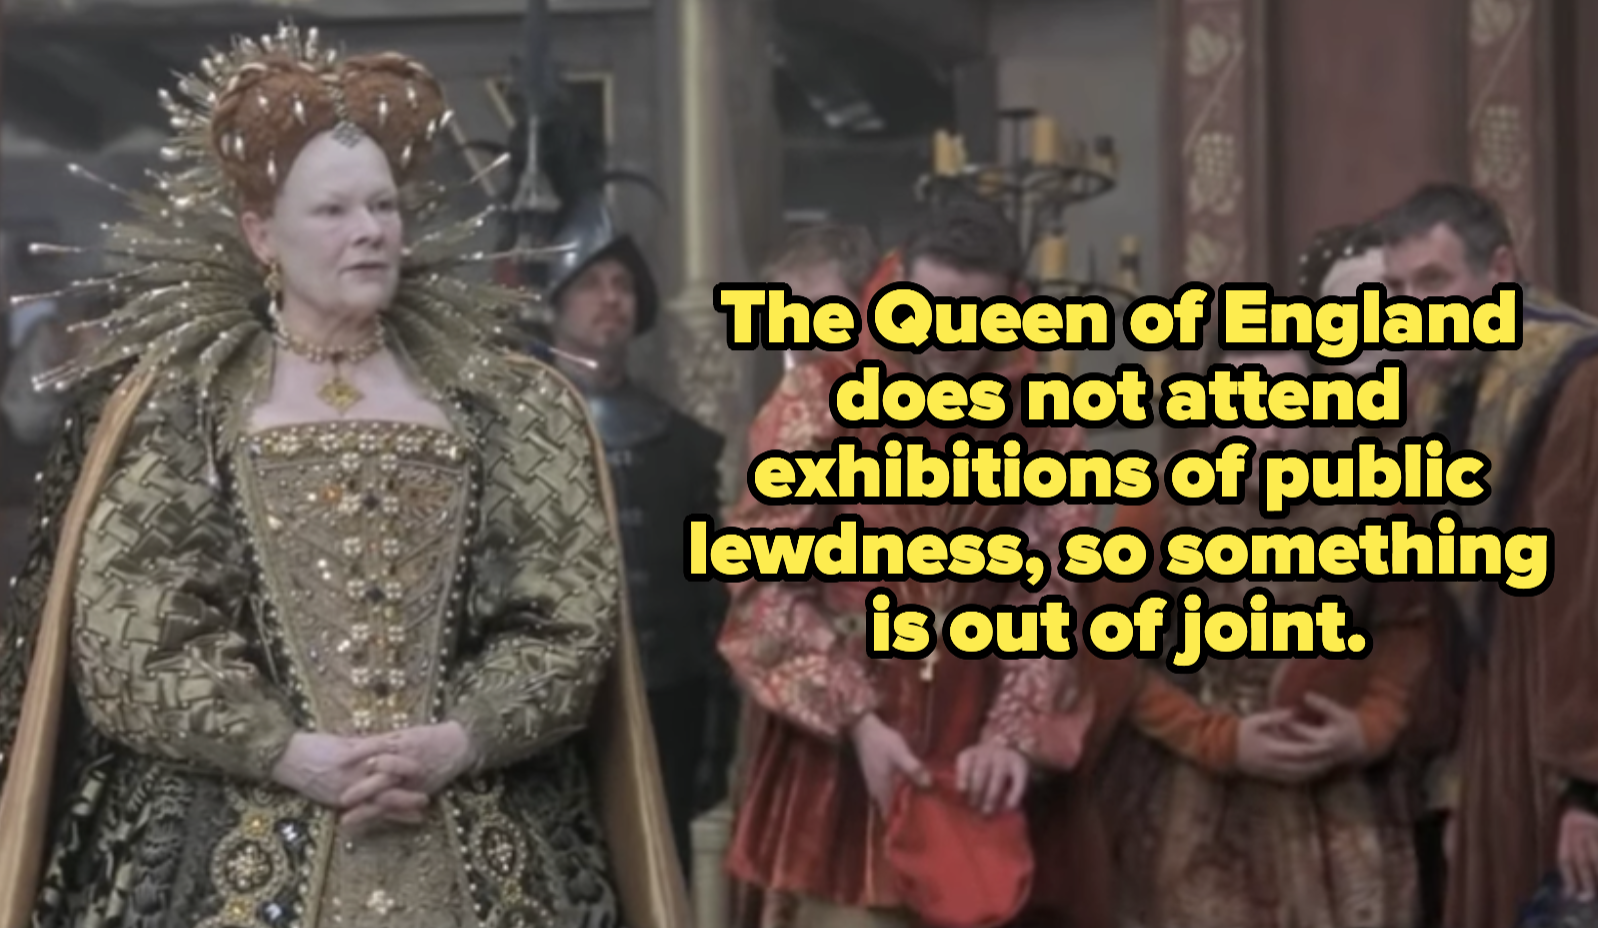 Queen Elizabeth says, &quot;The Queen of England does not attend exhibitions of public lewdness, so something is out of joint.&quot;